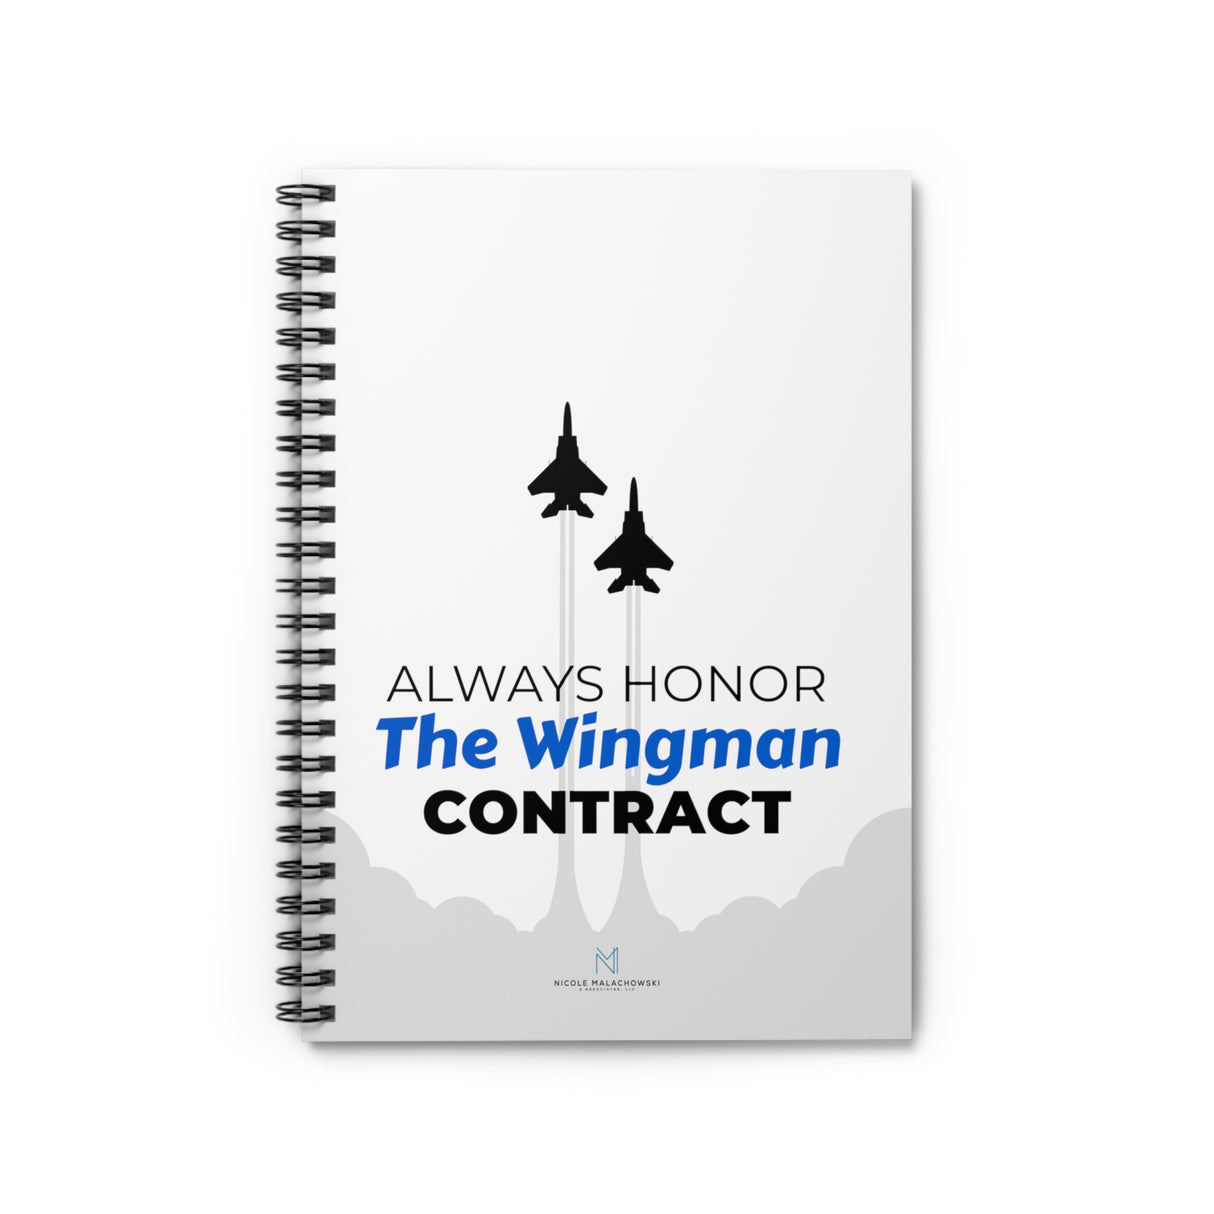 "The Wingman Contract" Spiral Notebook